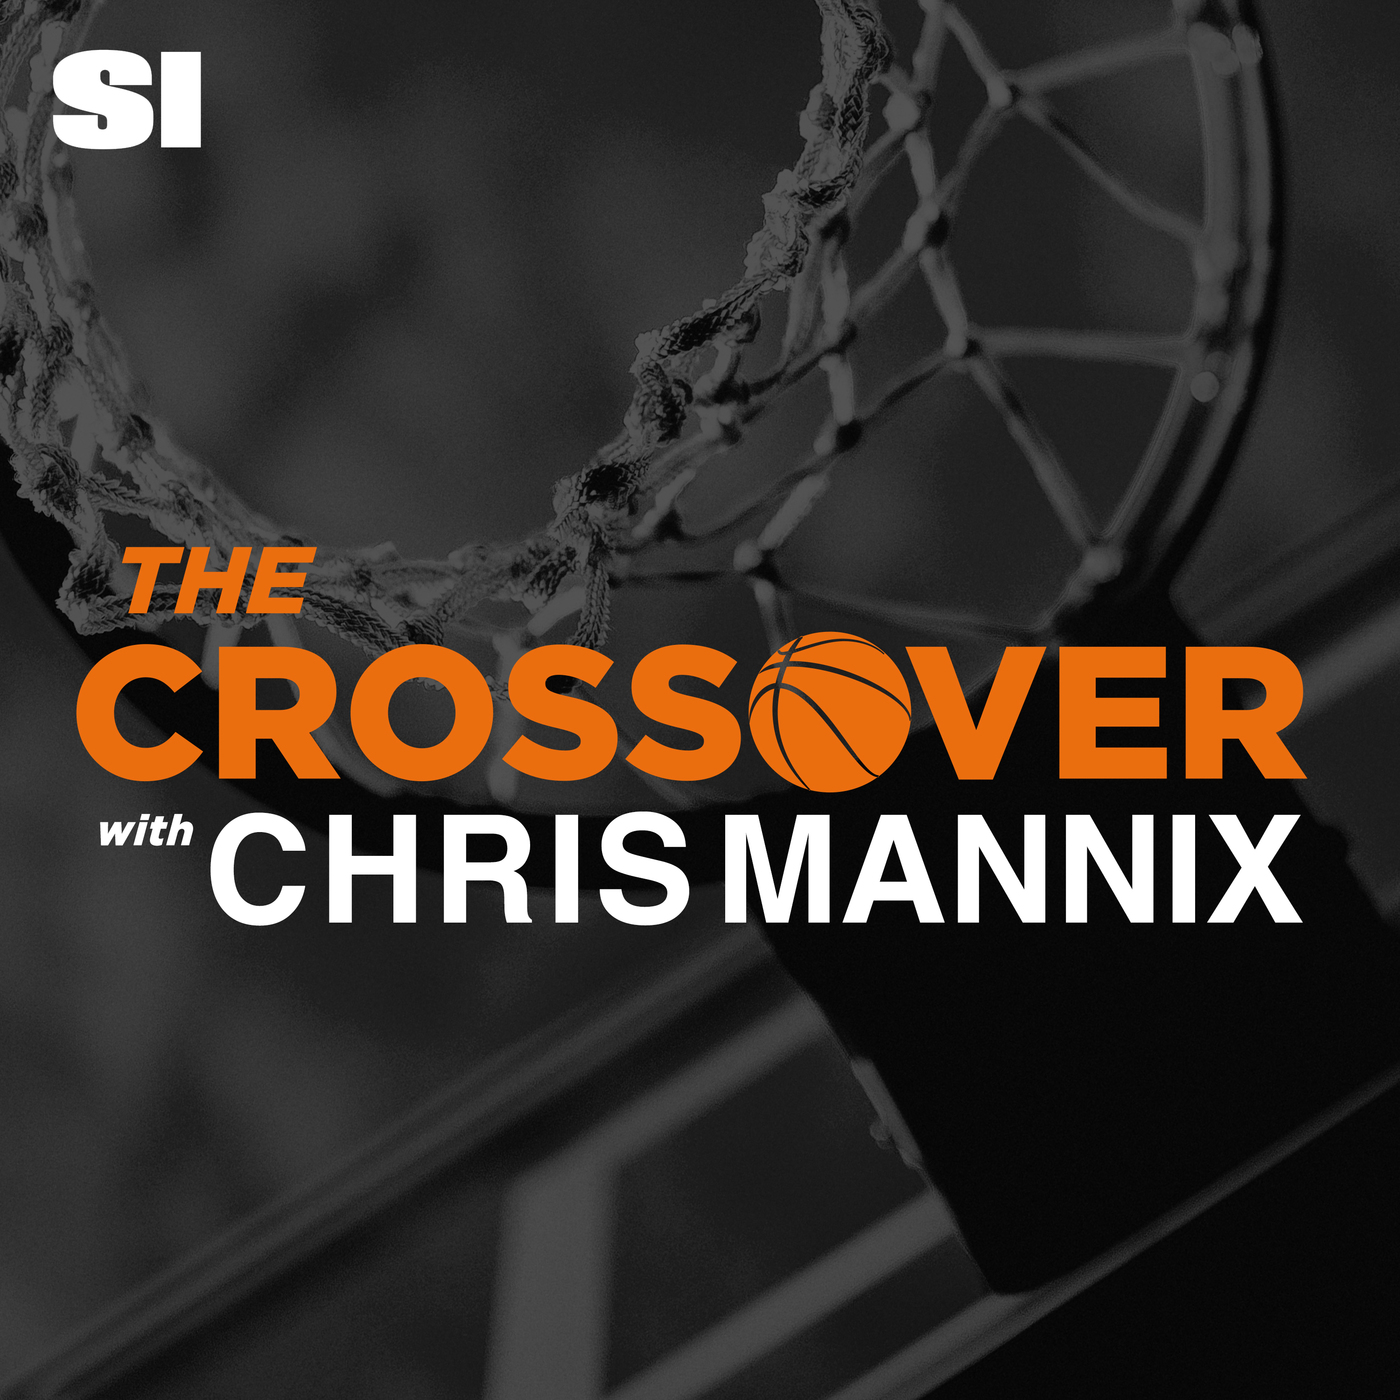 Fresh update on "steph curry" discussed on The Crossover NBA Show with Chris Mannix